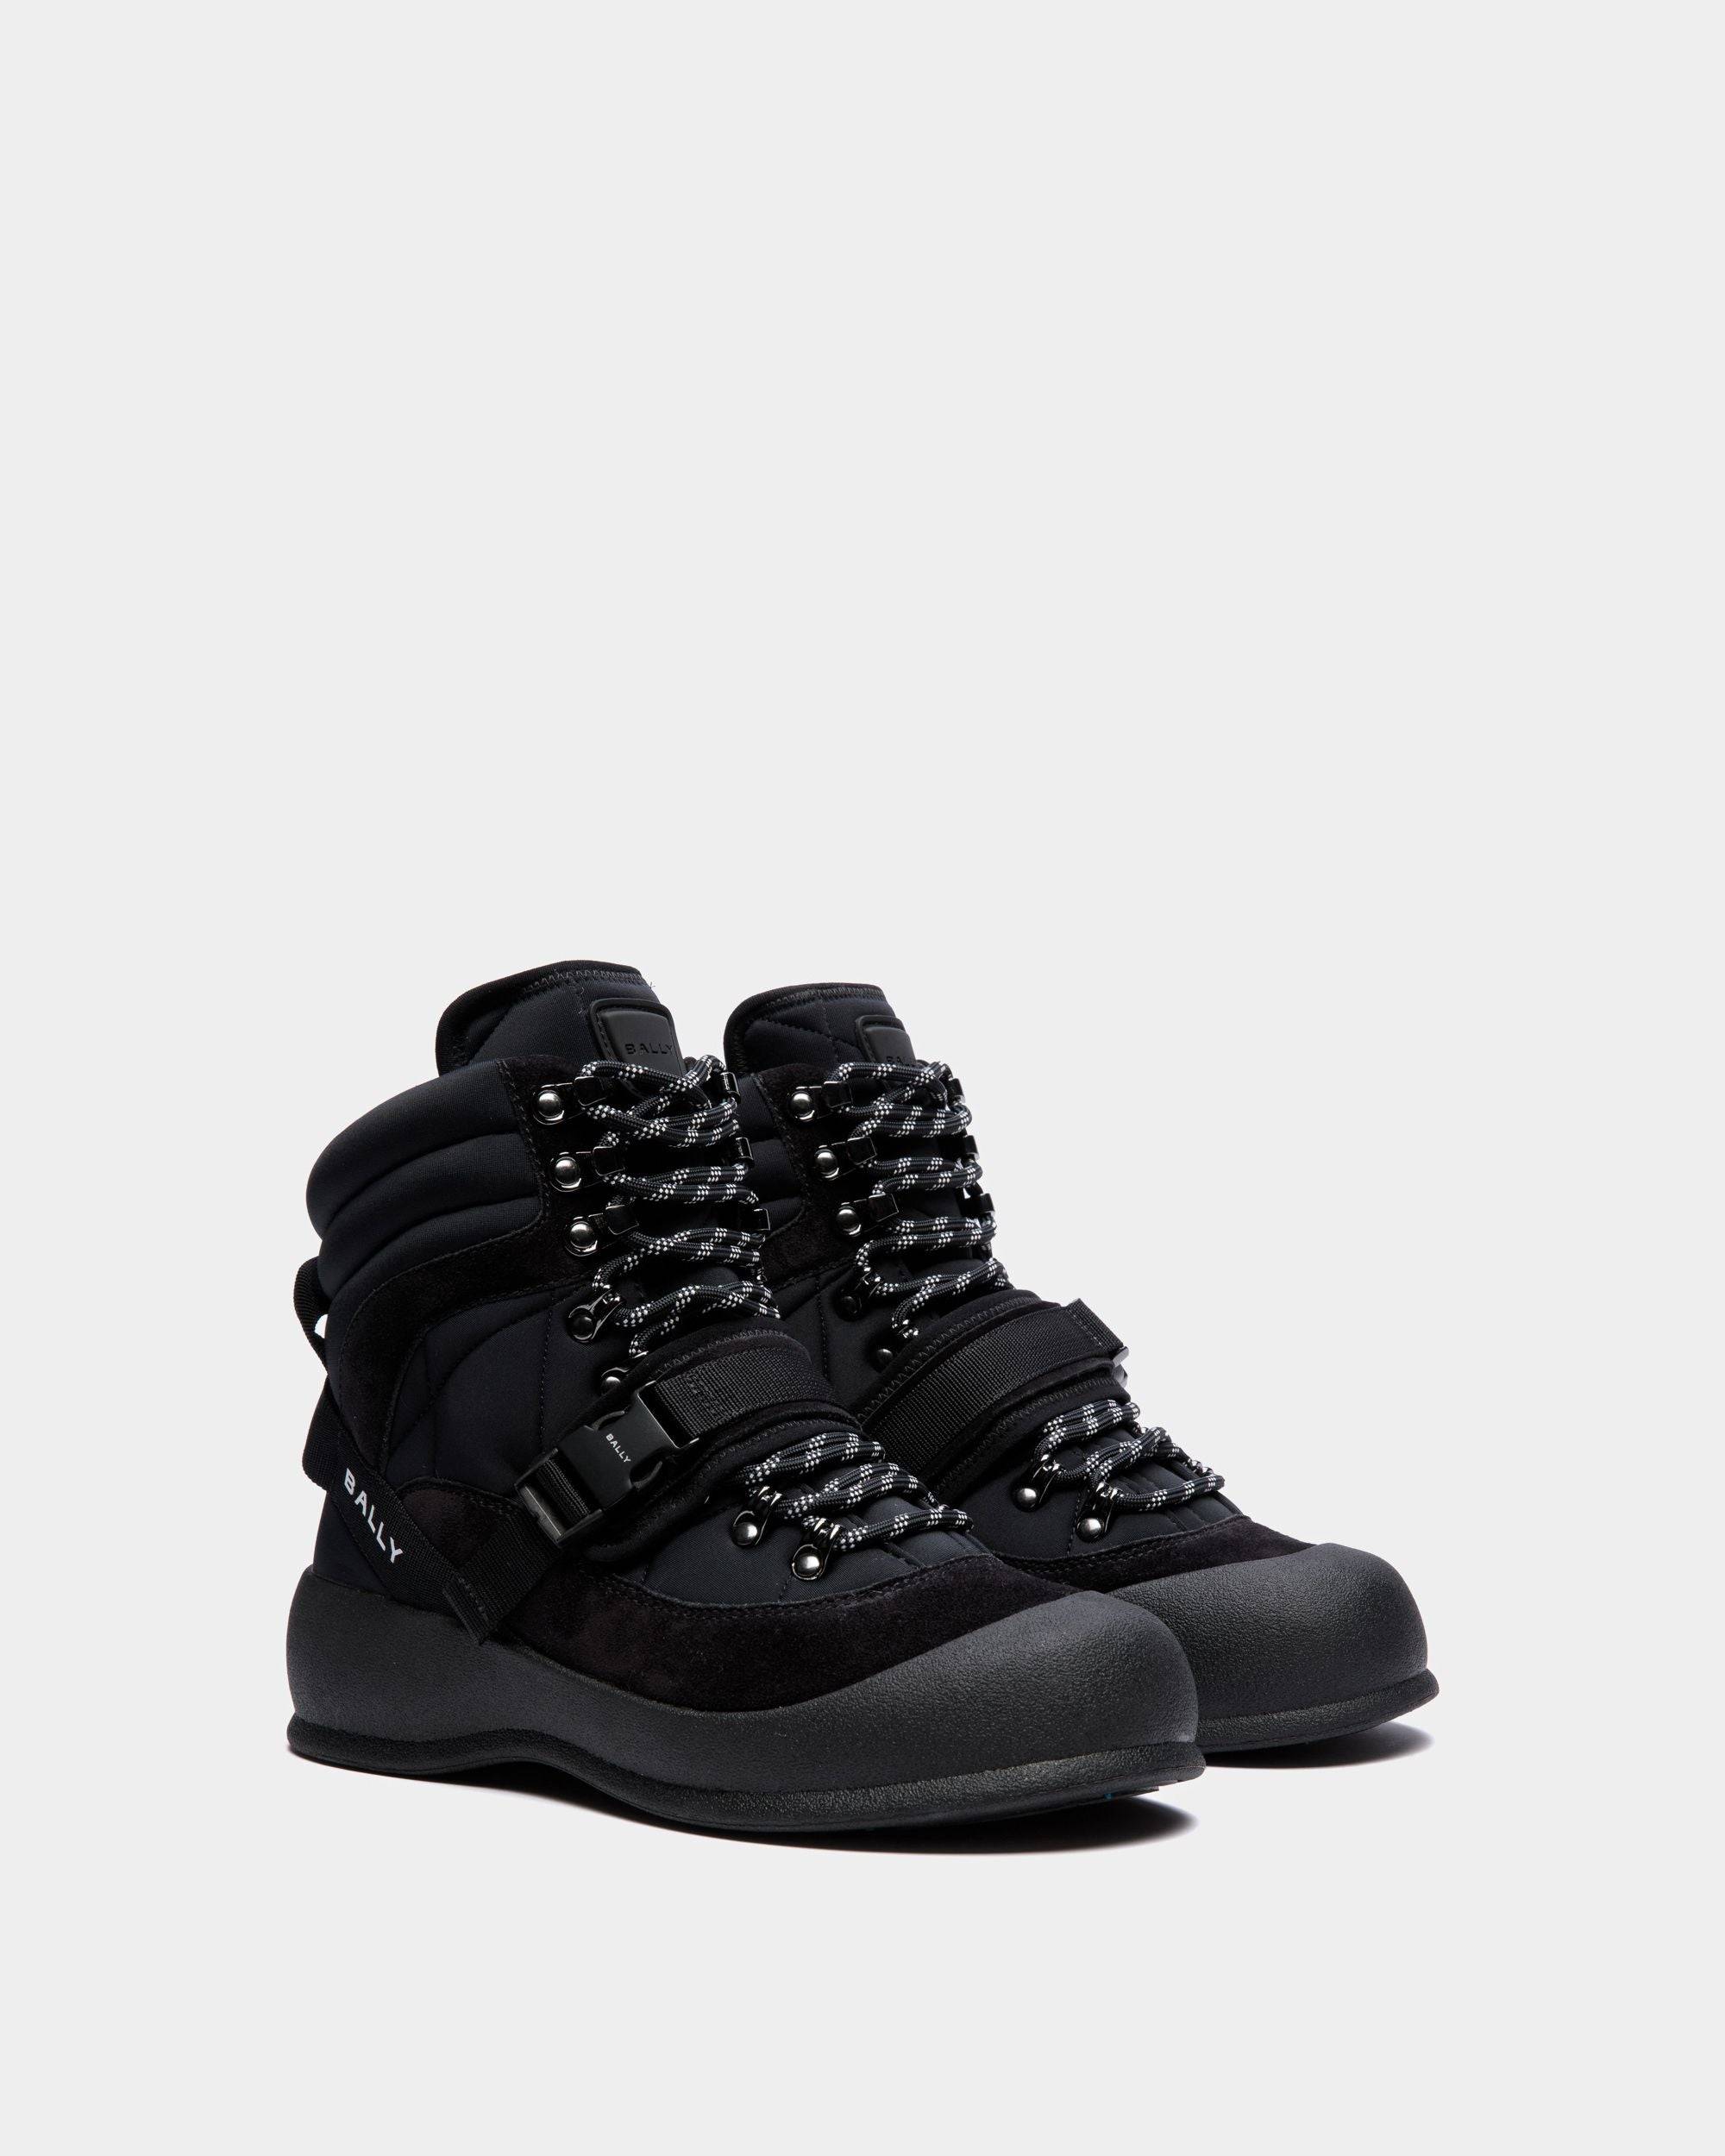 Frei | Women's Lace-Up Boot in Black Nylon | Bally | Still Life 3/4 Front